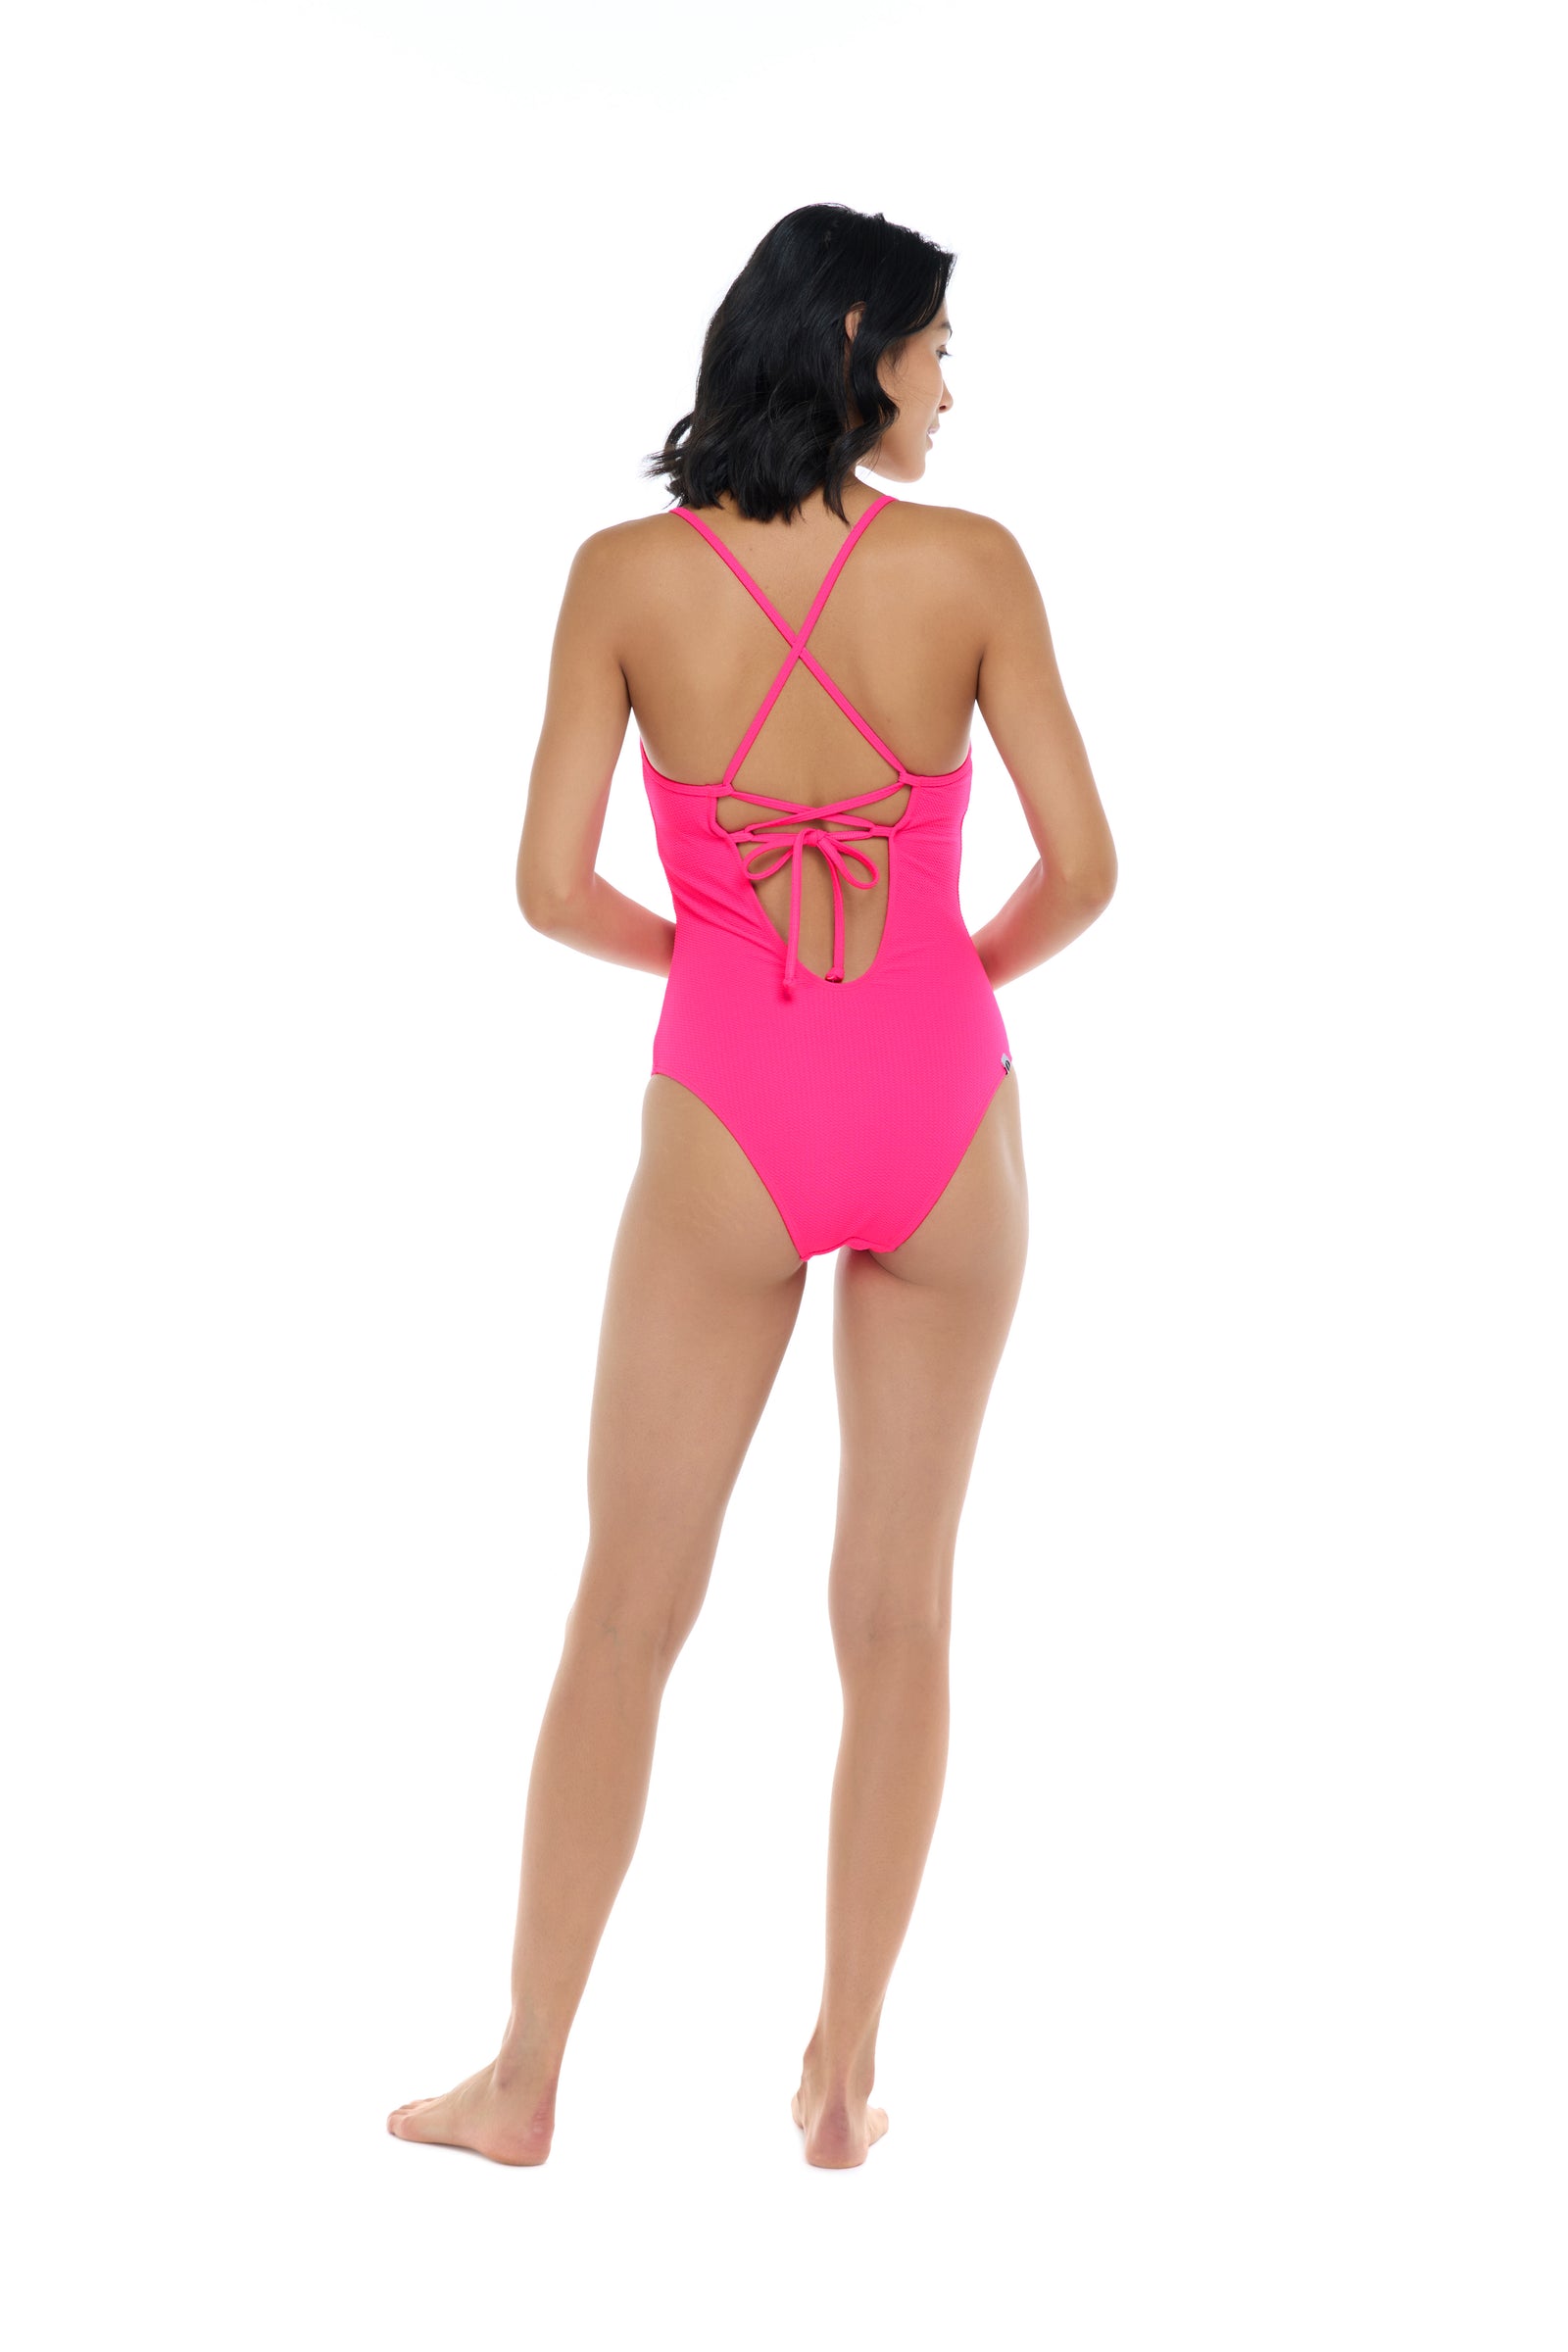 Eidon Sweet Love Naomi Heart 1 Piece  Polyester/Spandex  Removable soft cups  Heart shaped ring 2-way tie back Back View